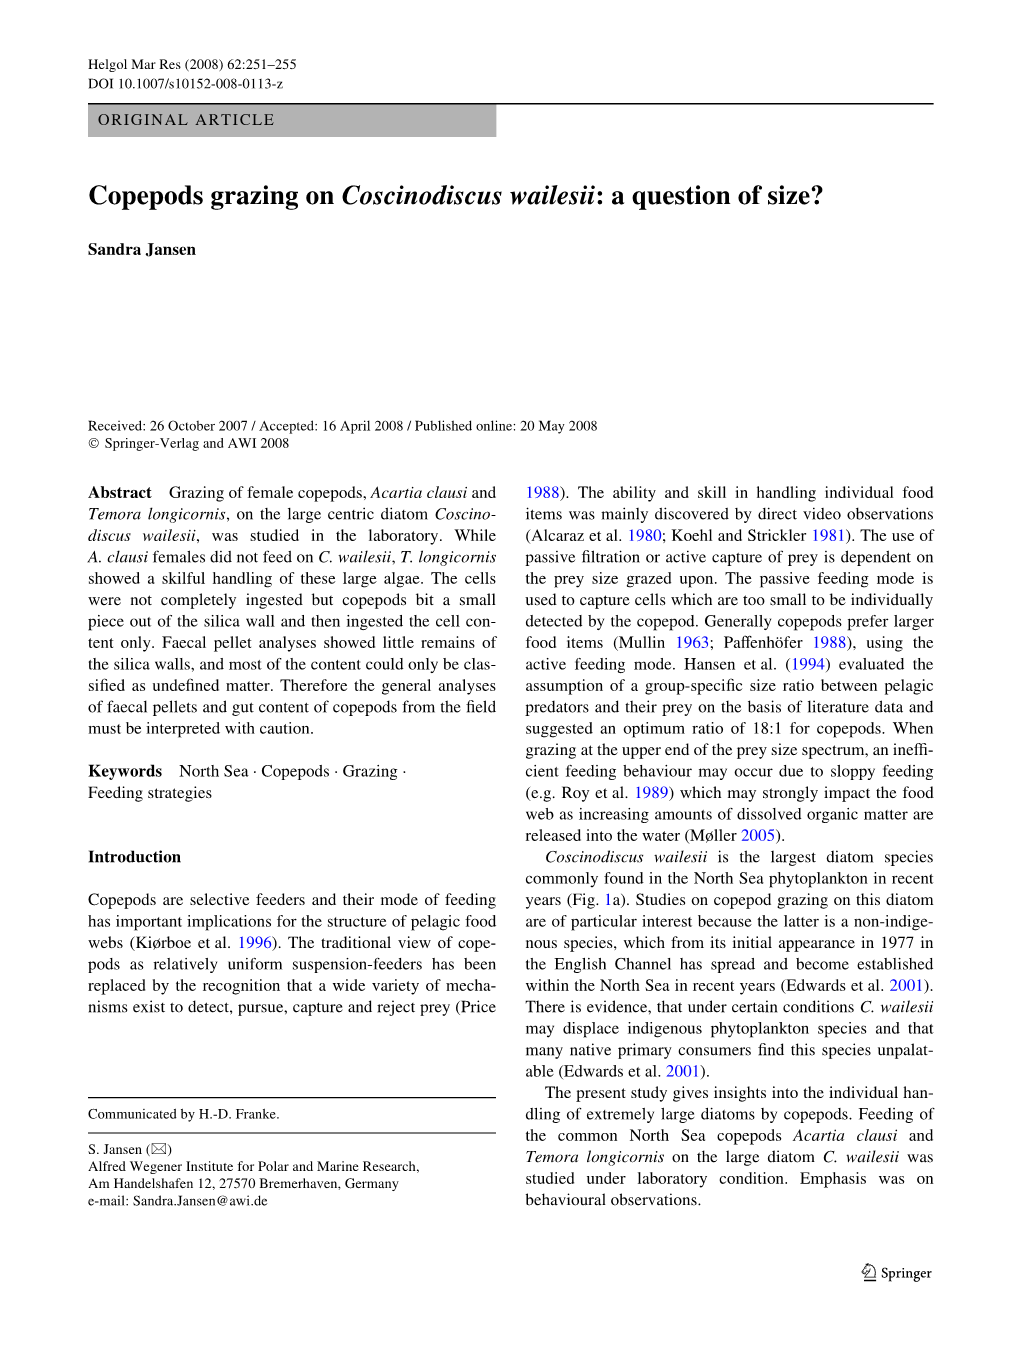 Copepods Grazing on Coscinodiscus Wailesii: a Question of Size?